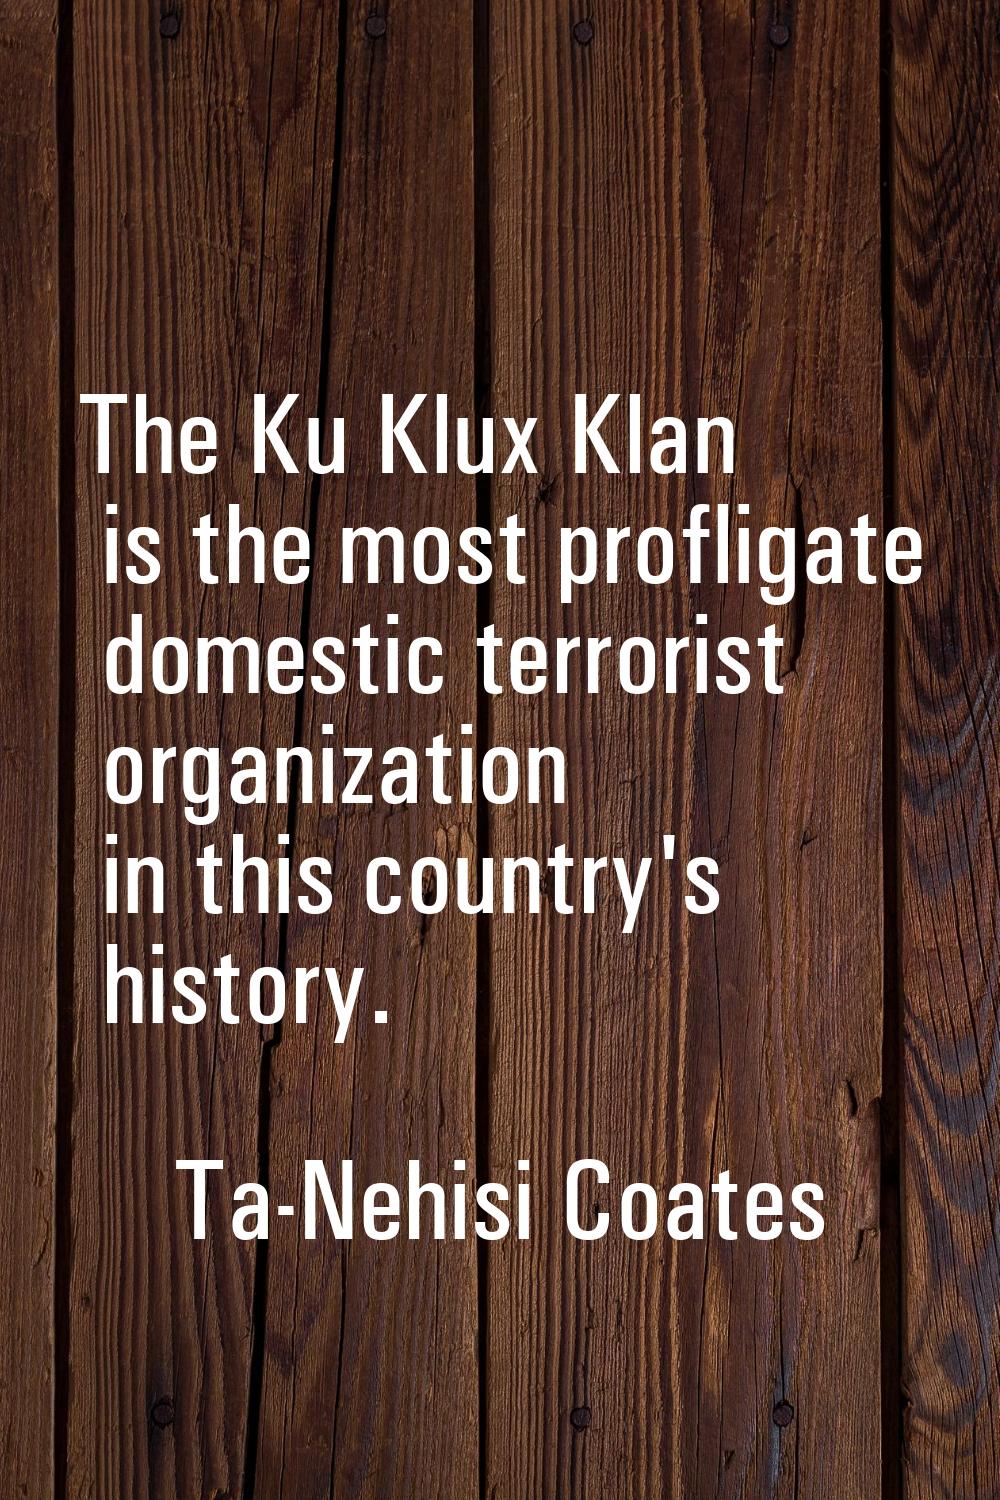 The Ku Klux Klan is the most profligate domestic terrorist organization in this country's history.